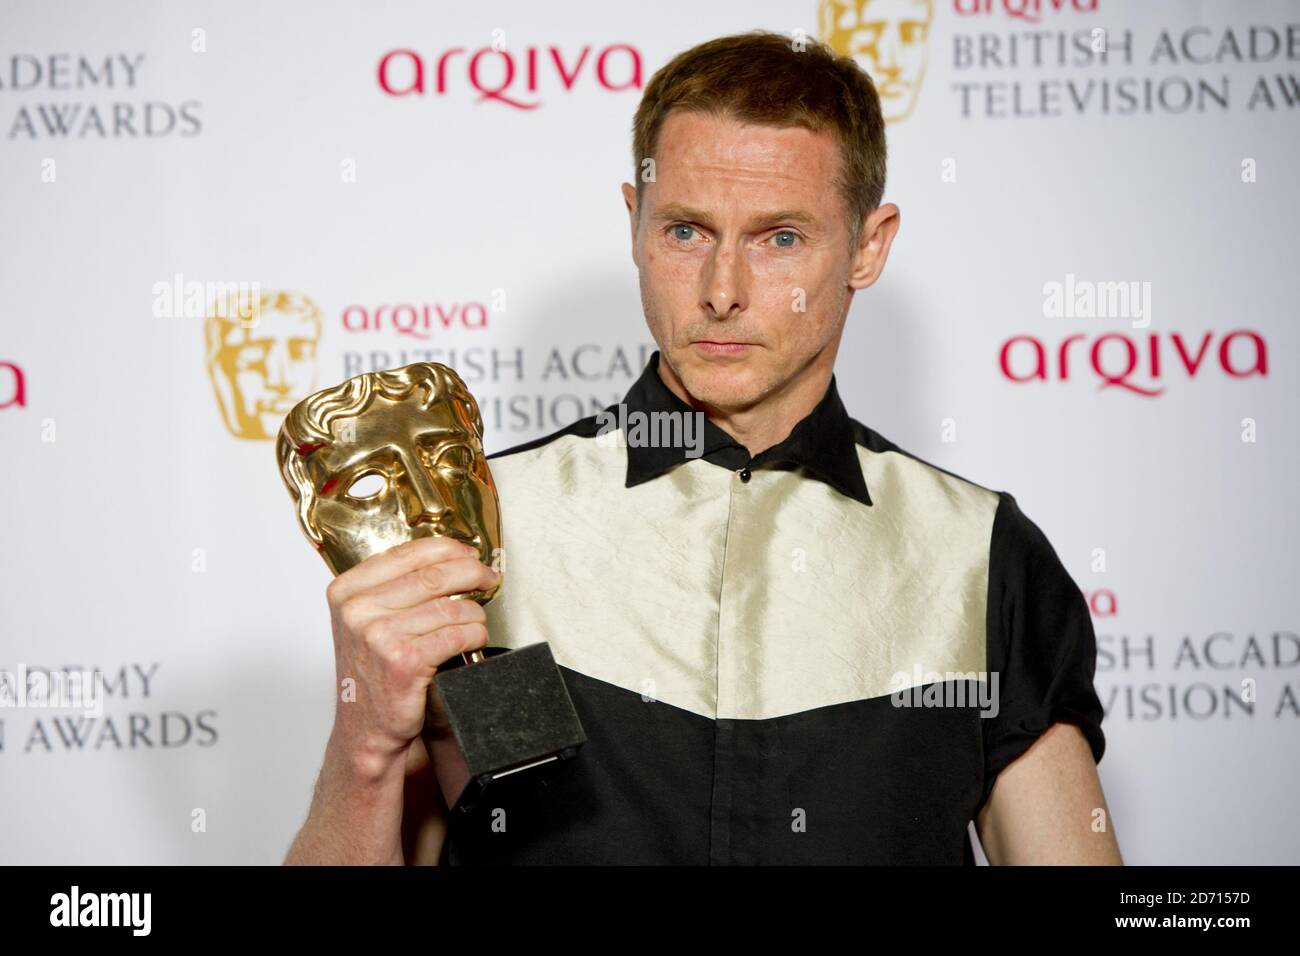 Sean Harris with the Leading Actor Award for Southcliffe, in the press room at the 2014 Arqiva British Academy Television Awards at the Theatre Royal, Drury Lane, London. Stock Photo